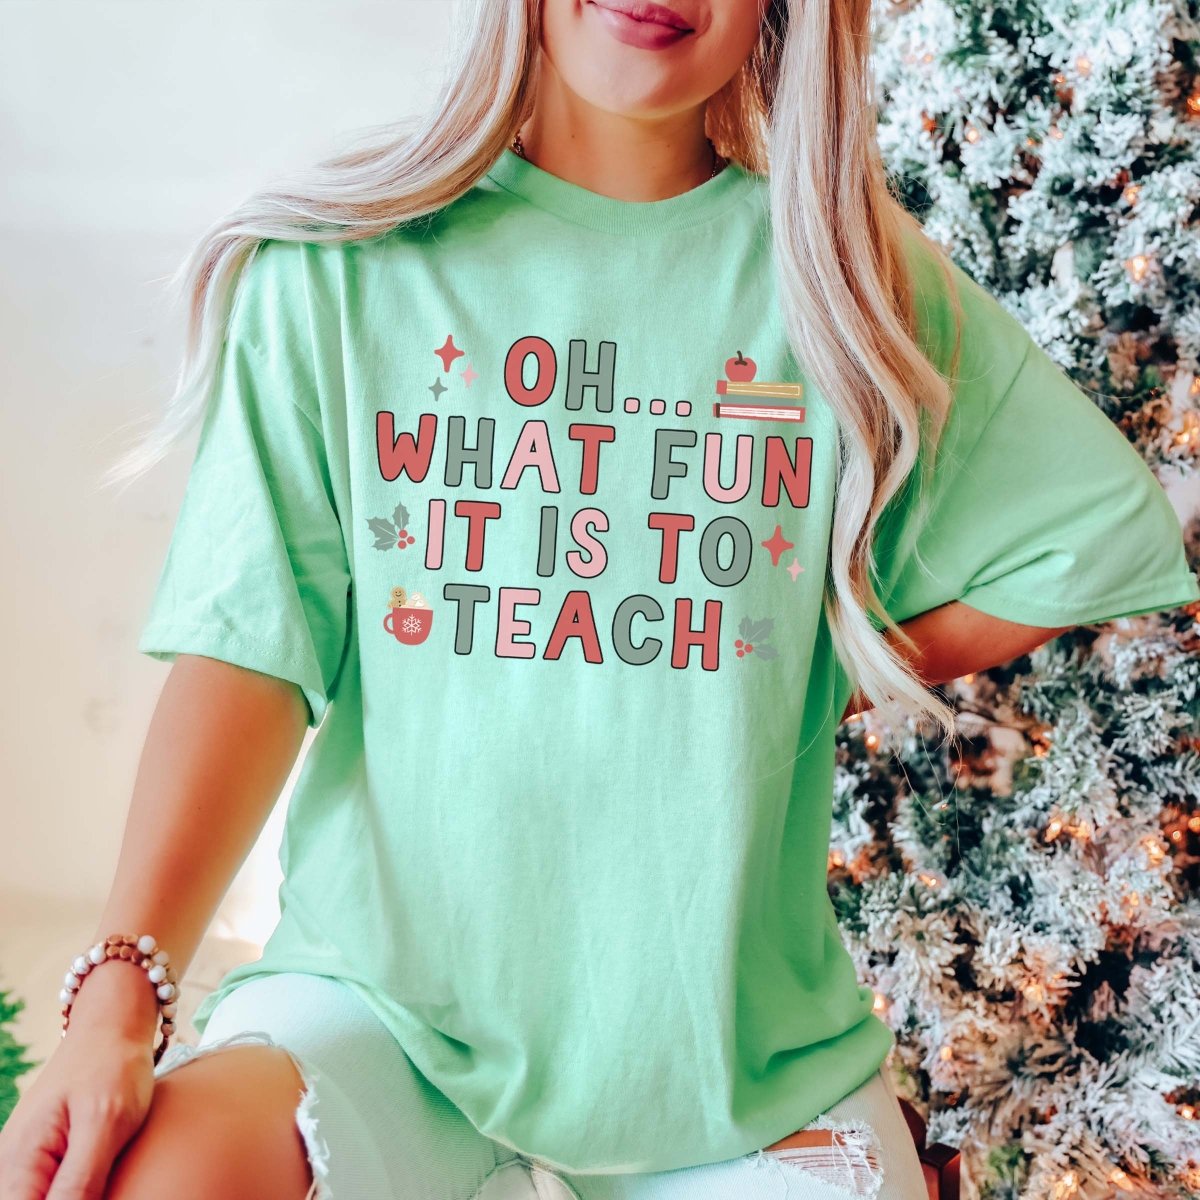 Oh What fun to teach Comfort Colors Tee - Limeberry Designs